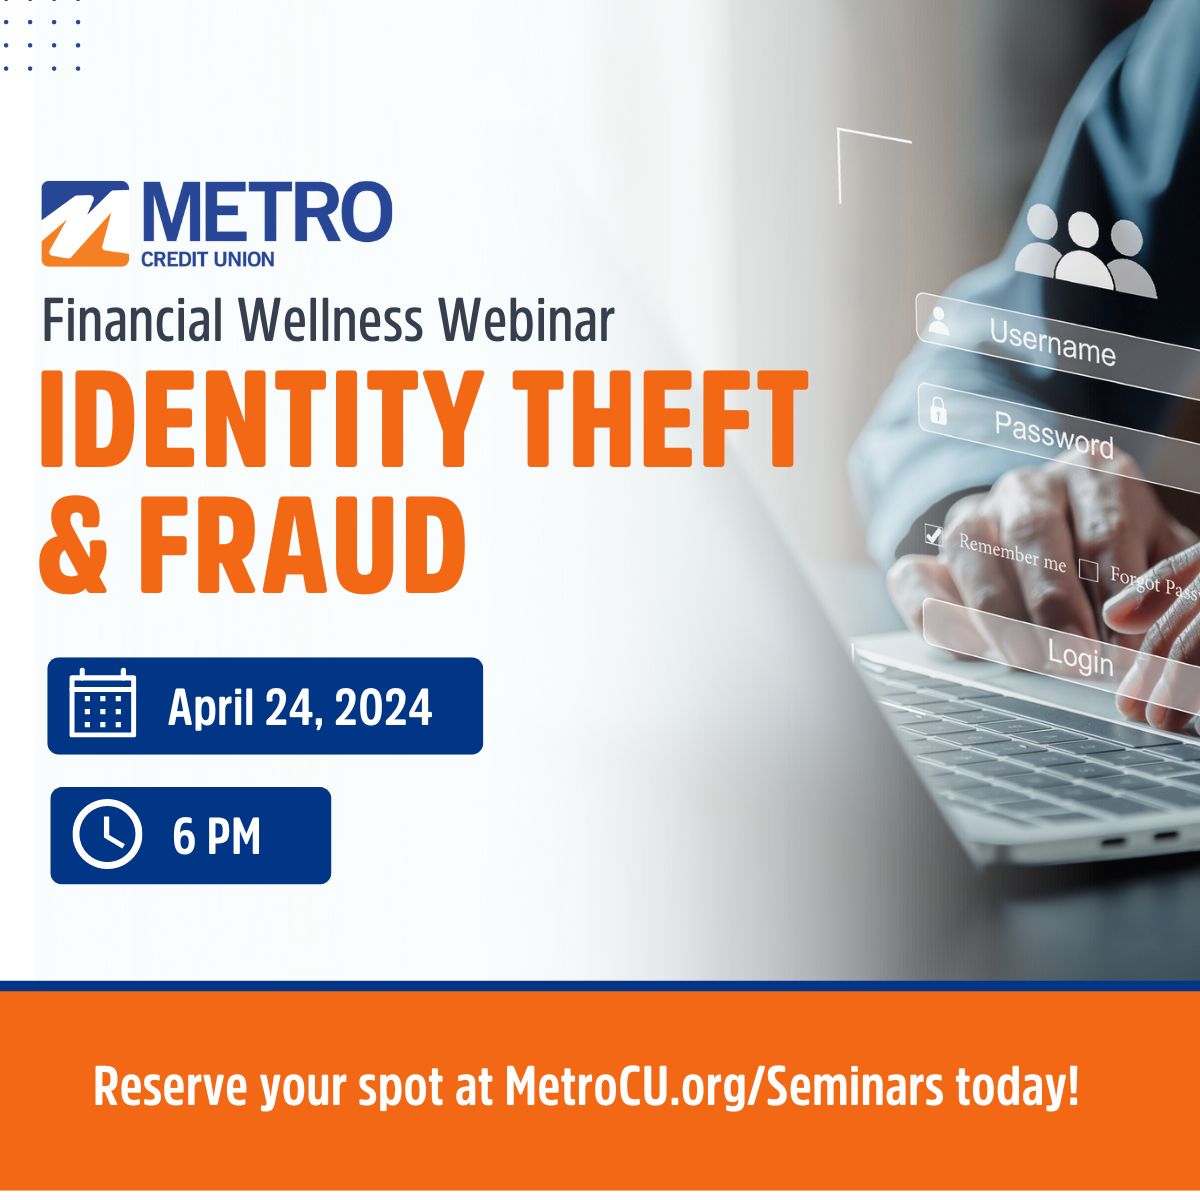 It’s not too late to register! Join us for a #freewebinar to learn about tools and tips to protect yourself from #IDtheft and steps to take if it happens to you. Sign up to save your spot: ow.ly/Y3VA50Rivvq #fraudprevention #fraud #financialwellness